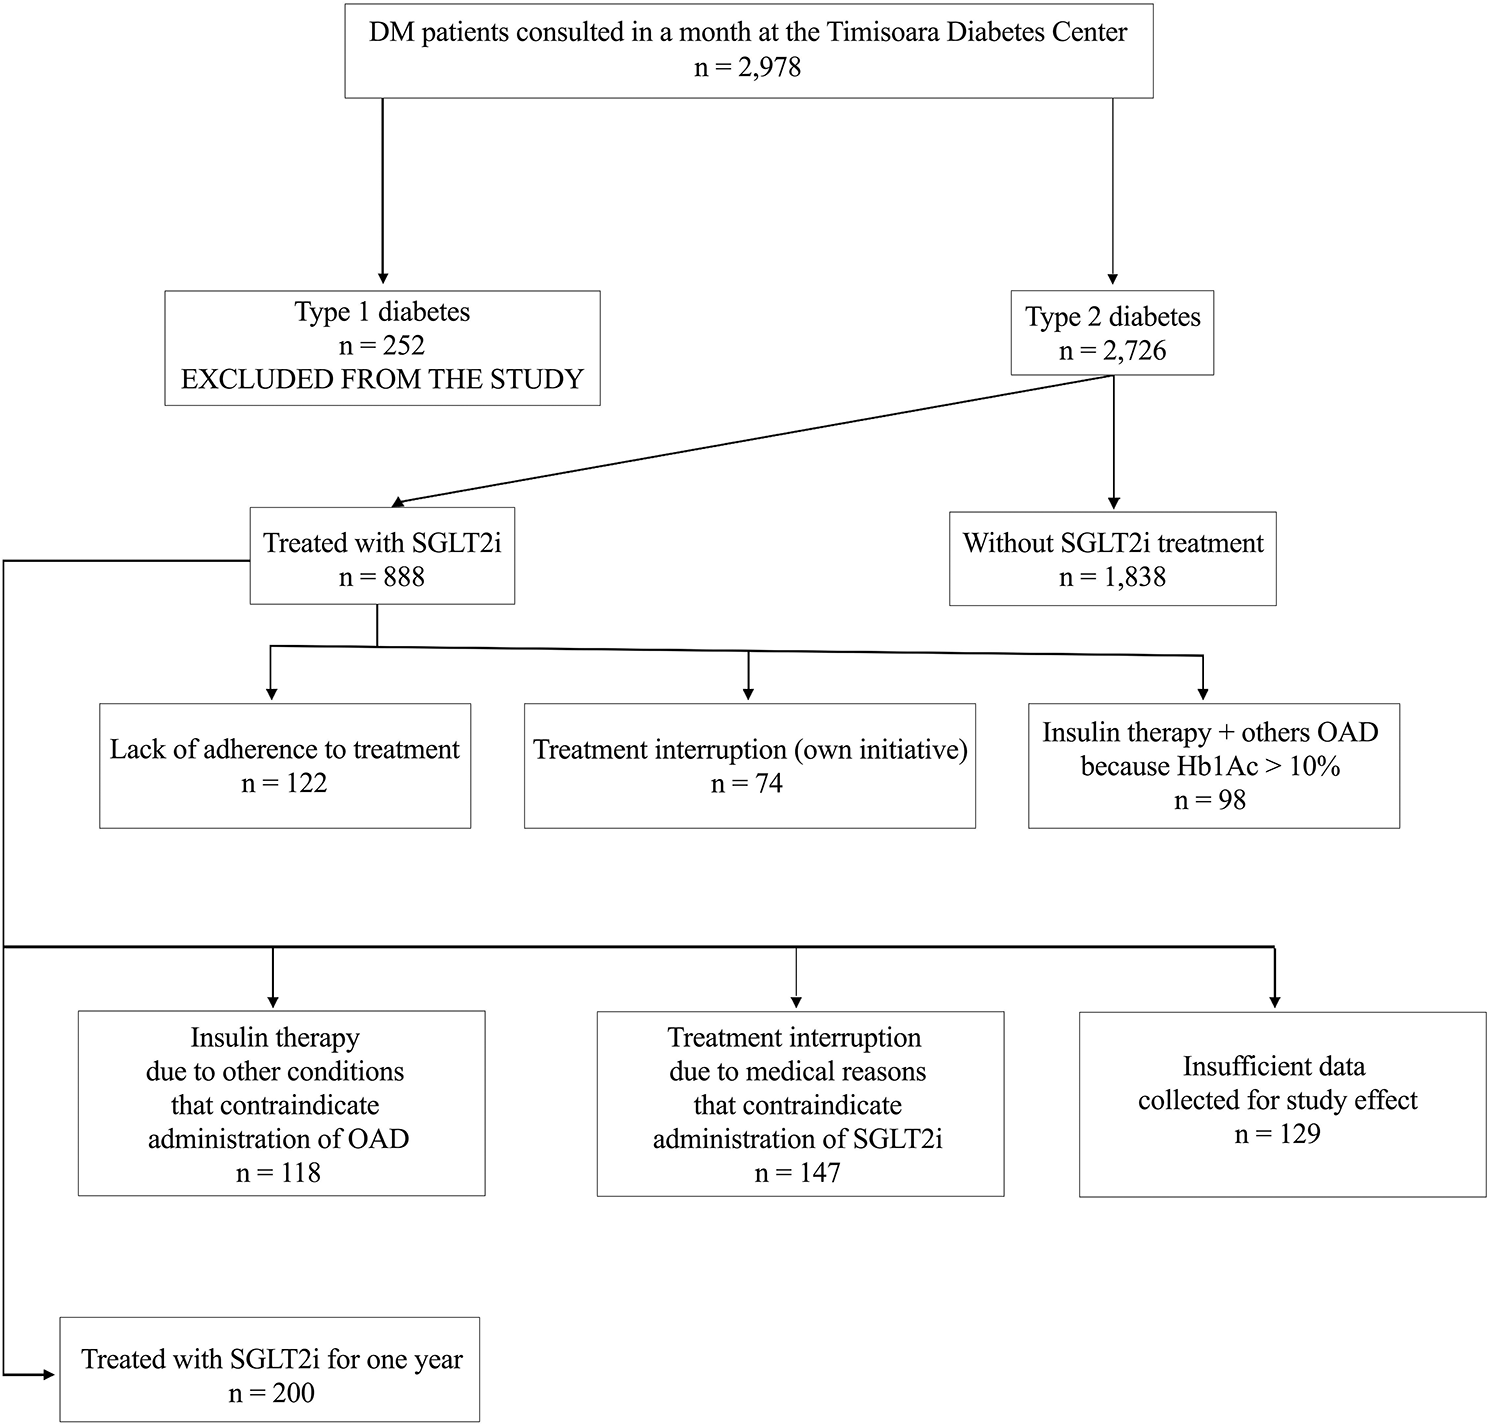 Impact of SGLT-2 inhibitors on modifiable cardiovascular risk factors in Romanian patients with type 2 diabetes mellitus